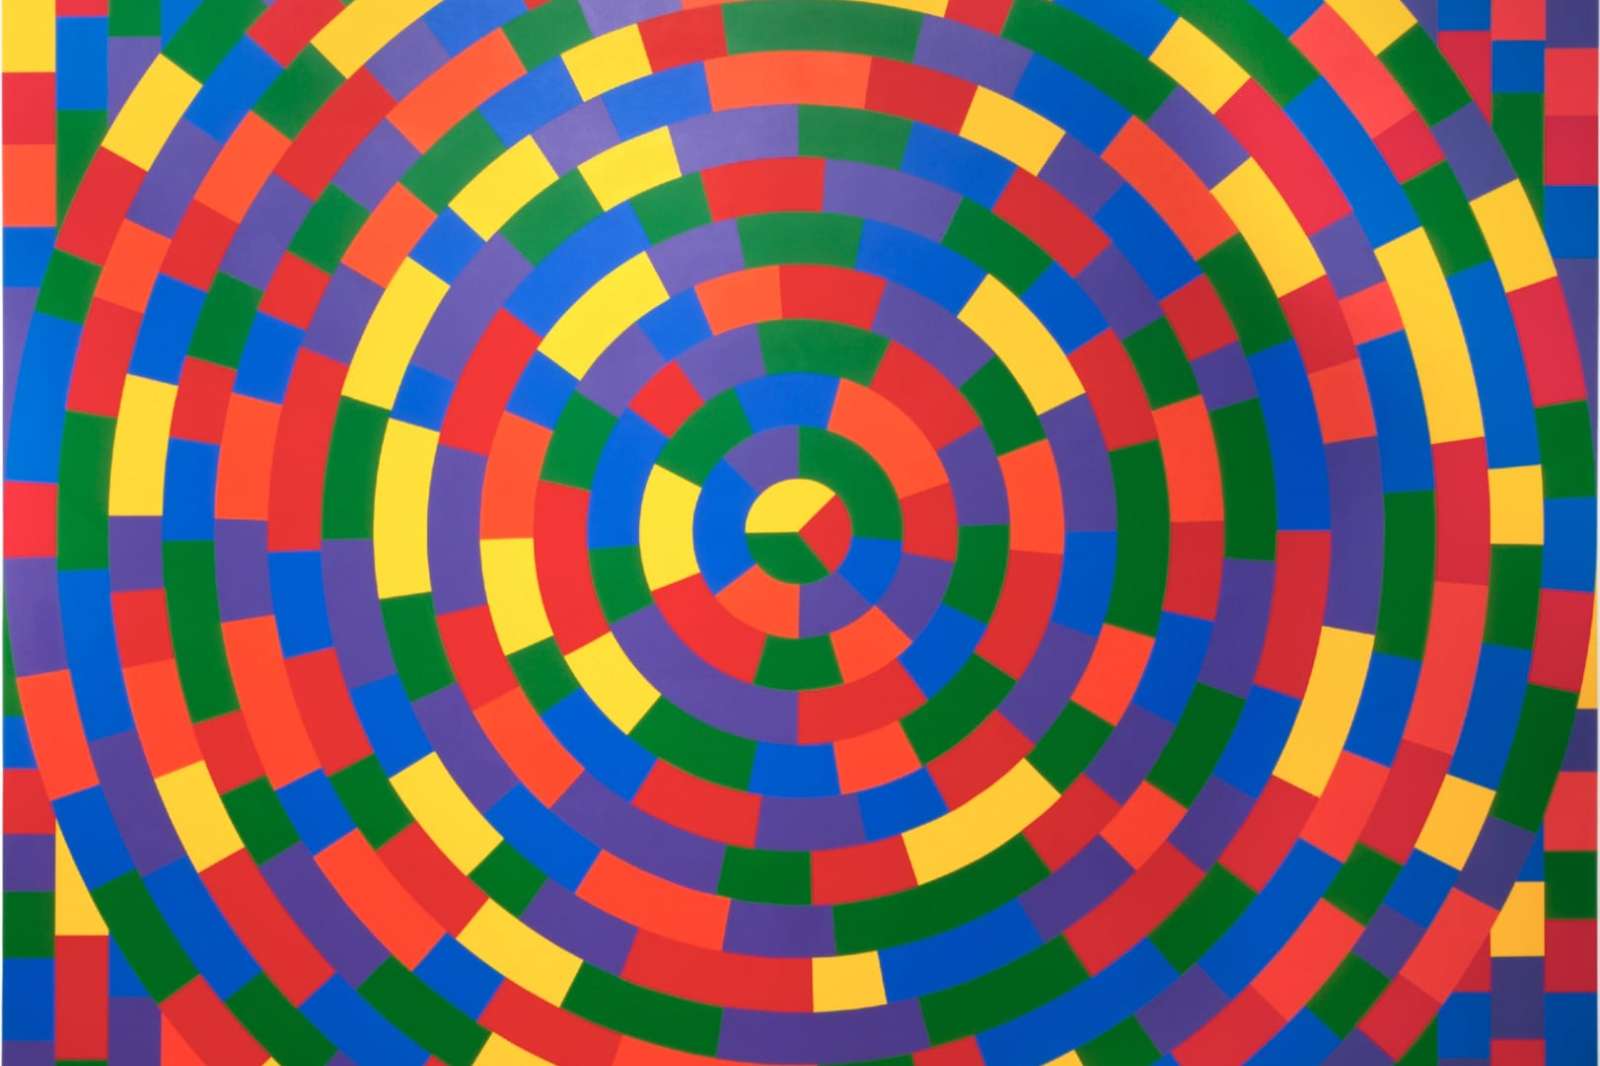 Sol LeWitt, Wall Drawing #1115: Circle within a square, each with broken bands of color, 2014, Acrylic paint, dimensions variable. Gift of H. Russell Pitman. © Estate of Sol LeWitt / Artists Rights Society (ARS), New York.